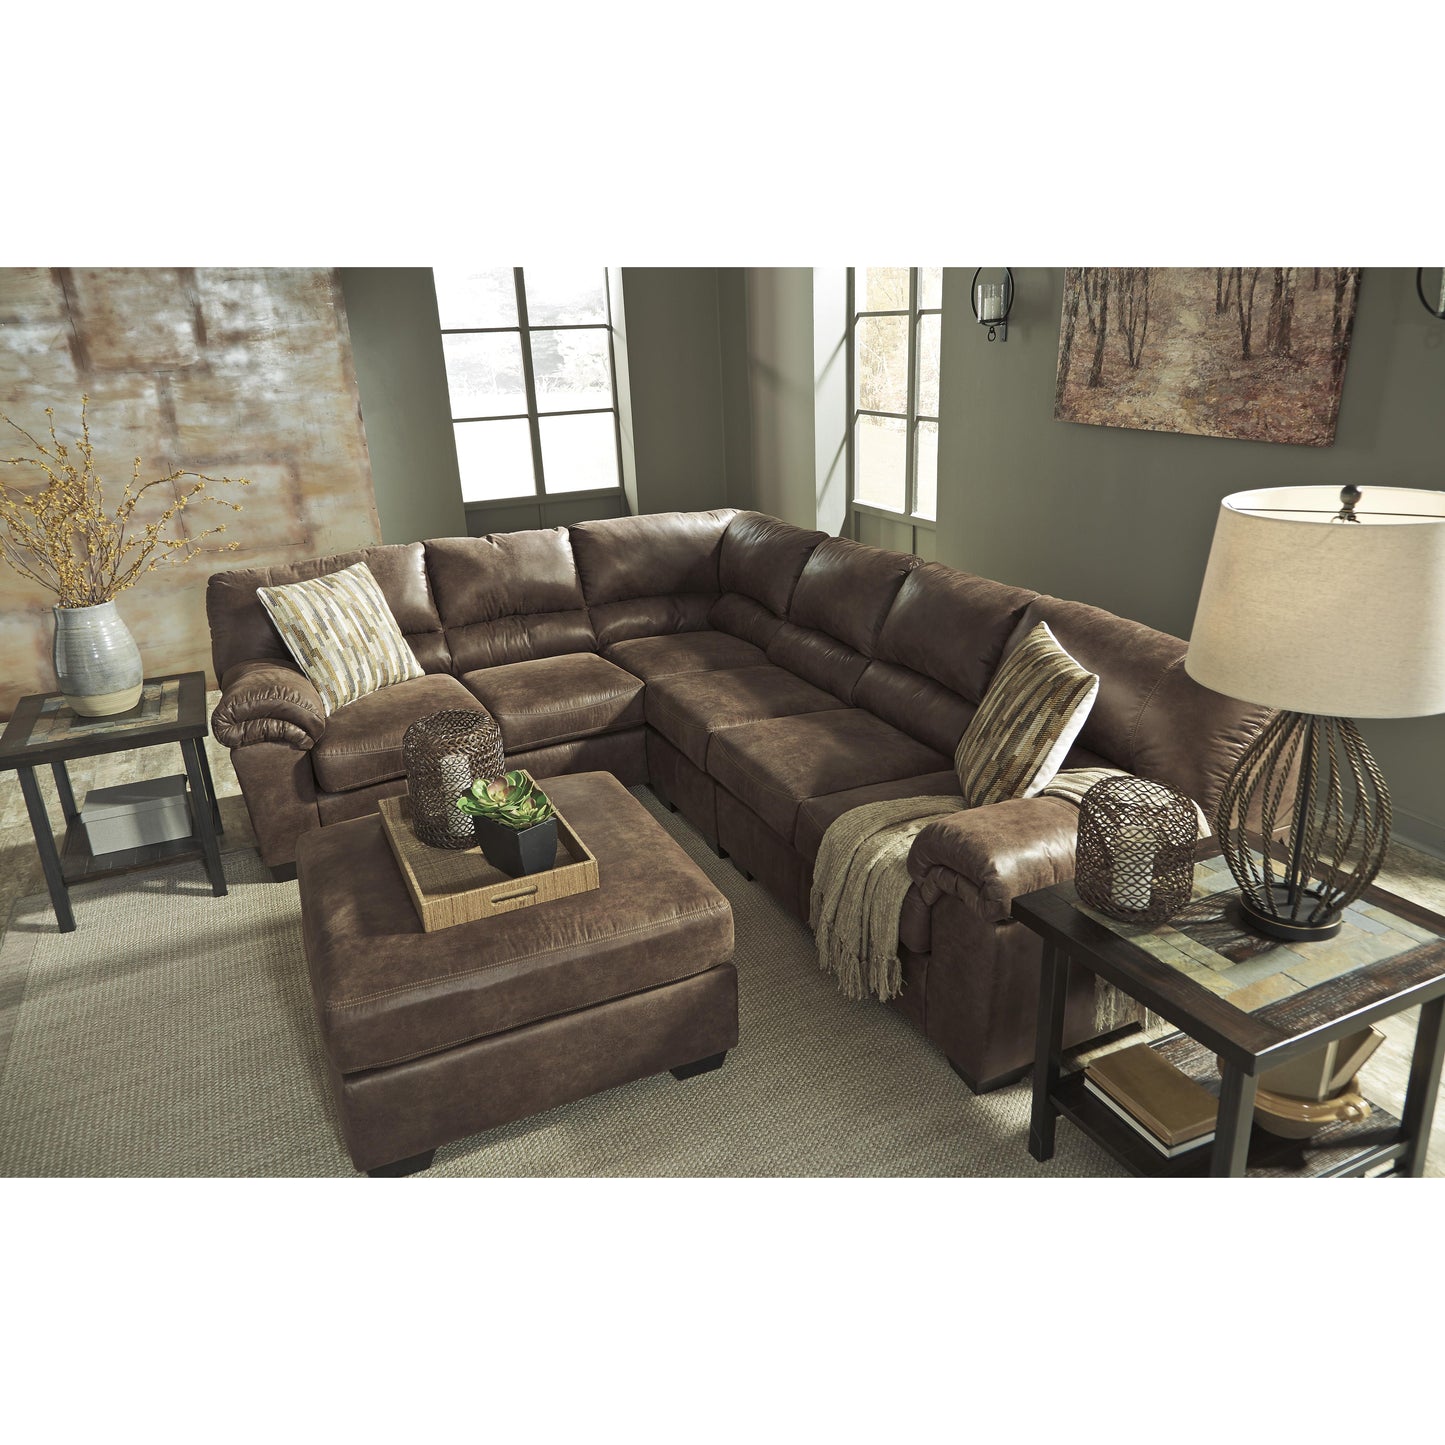 Signature Design by Ashley Bladen Leather Look 3 pc Sectional 1202066/1202046/1202056